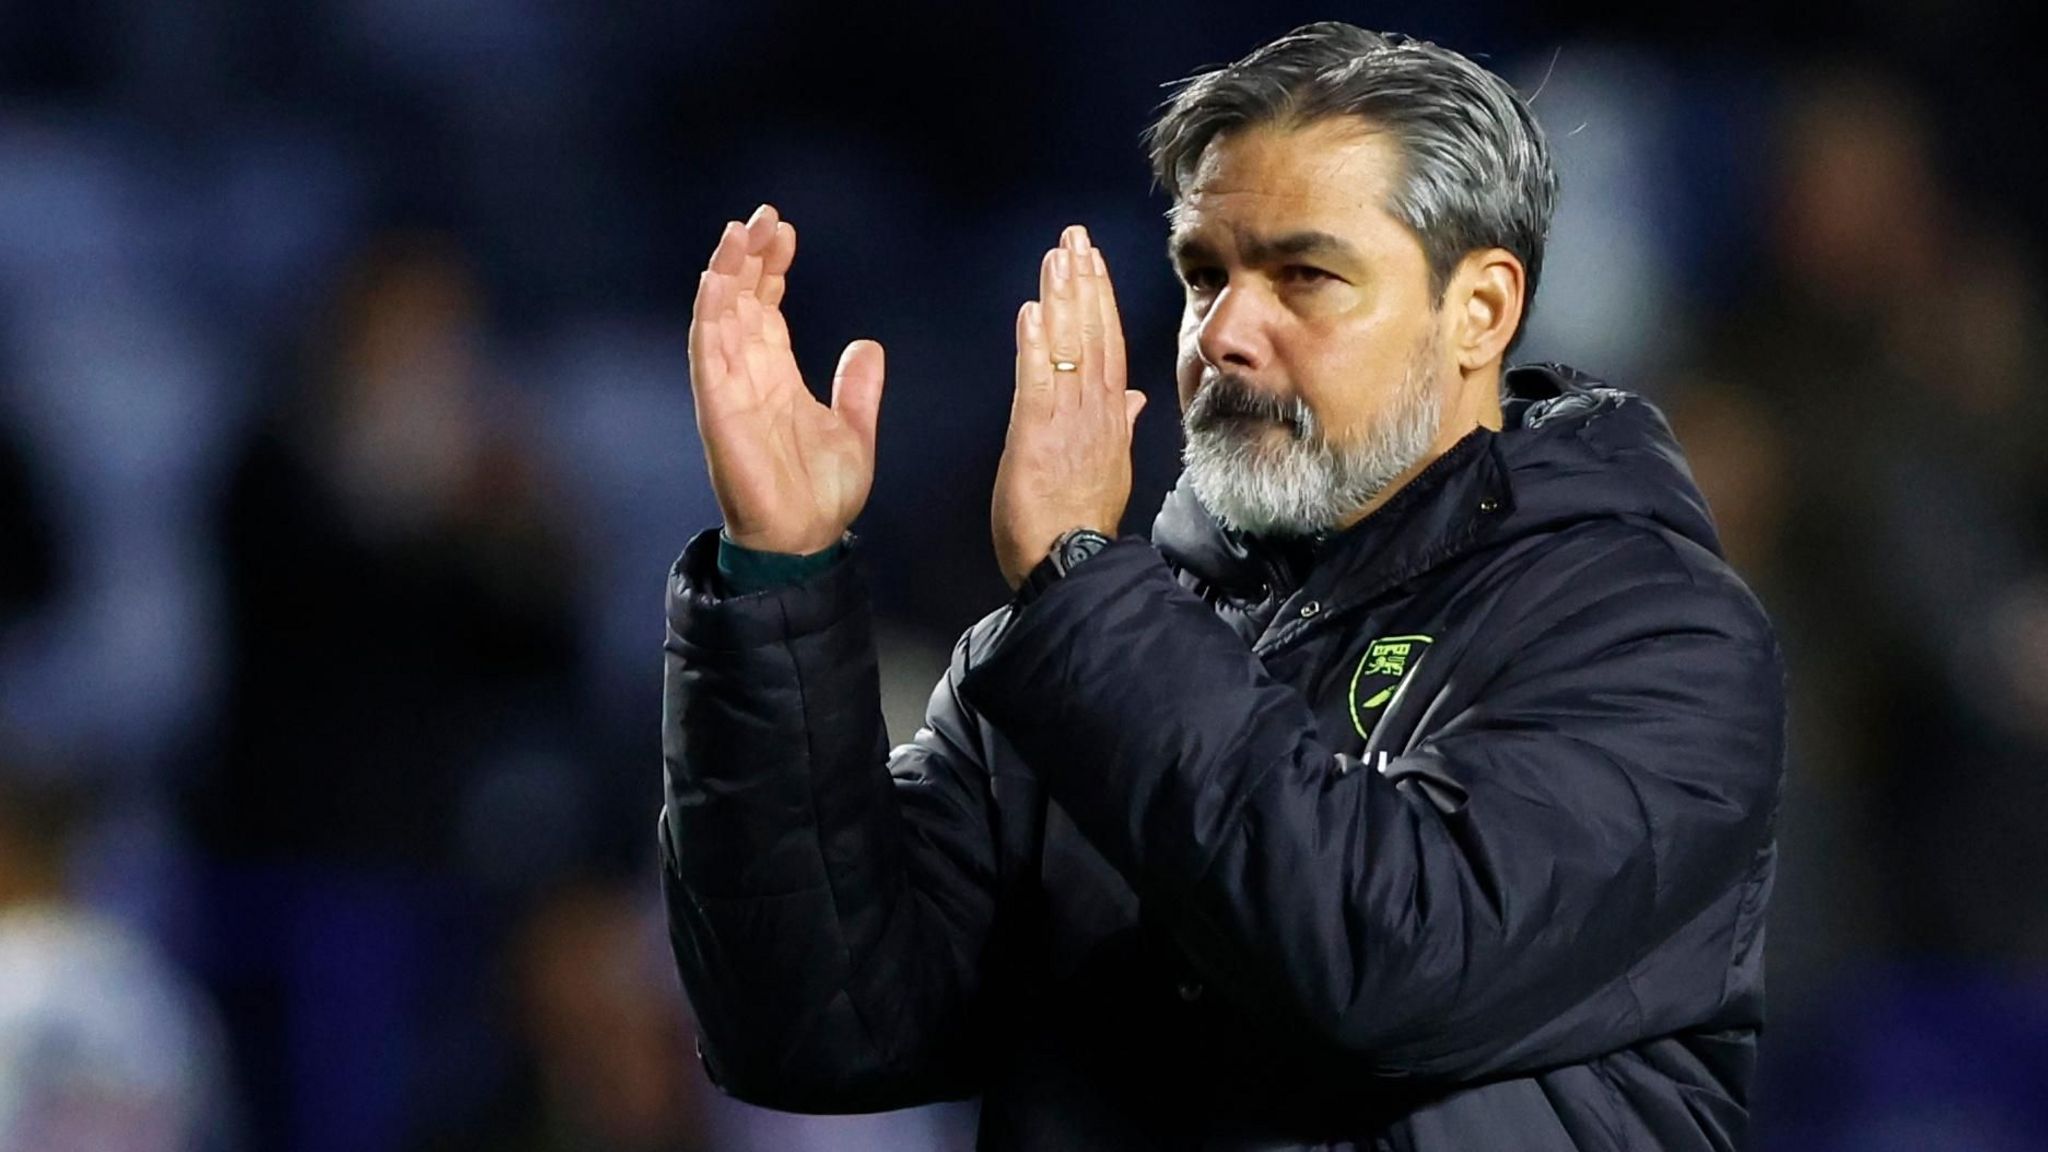 Norwich City pundits and fans react to David Wagner sacking - BBC News